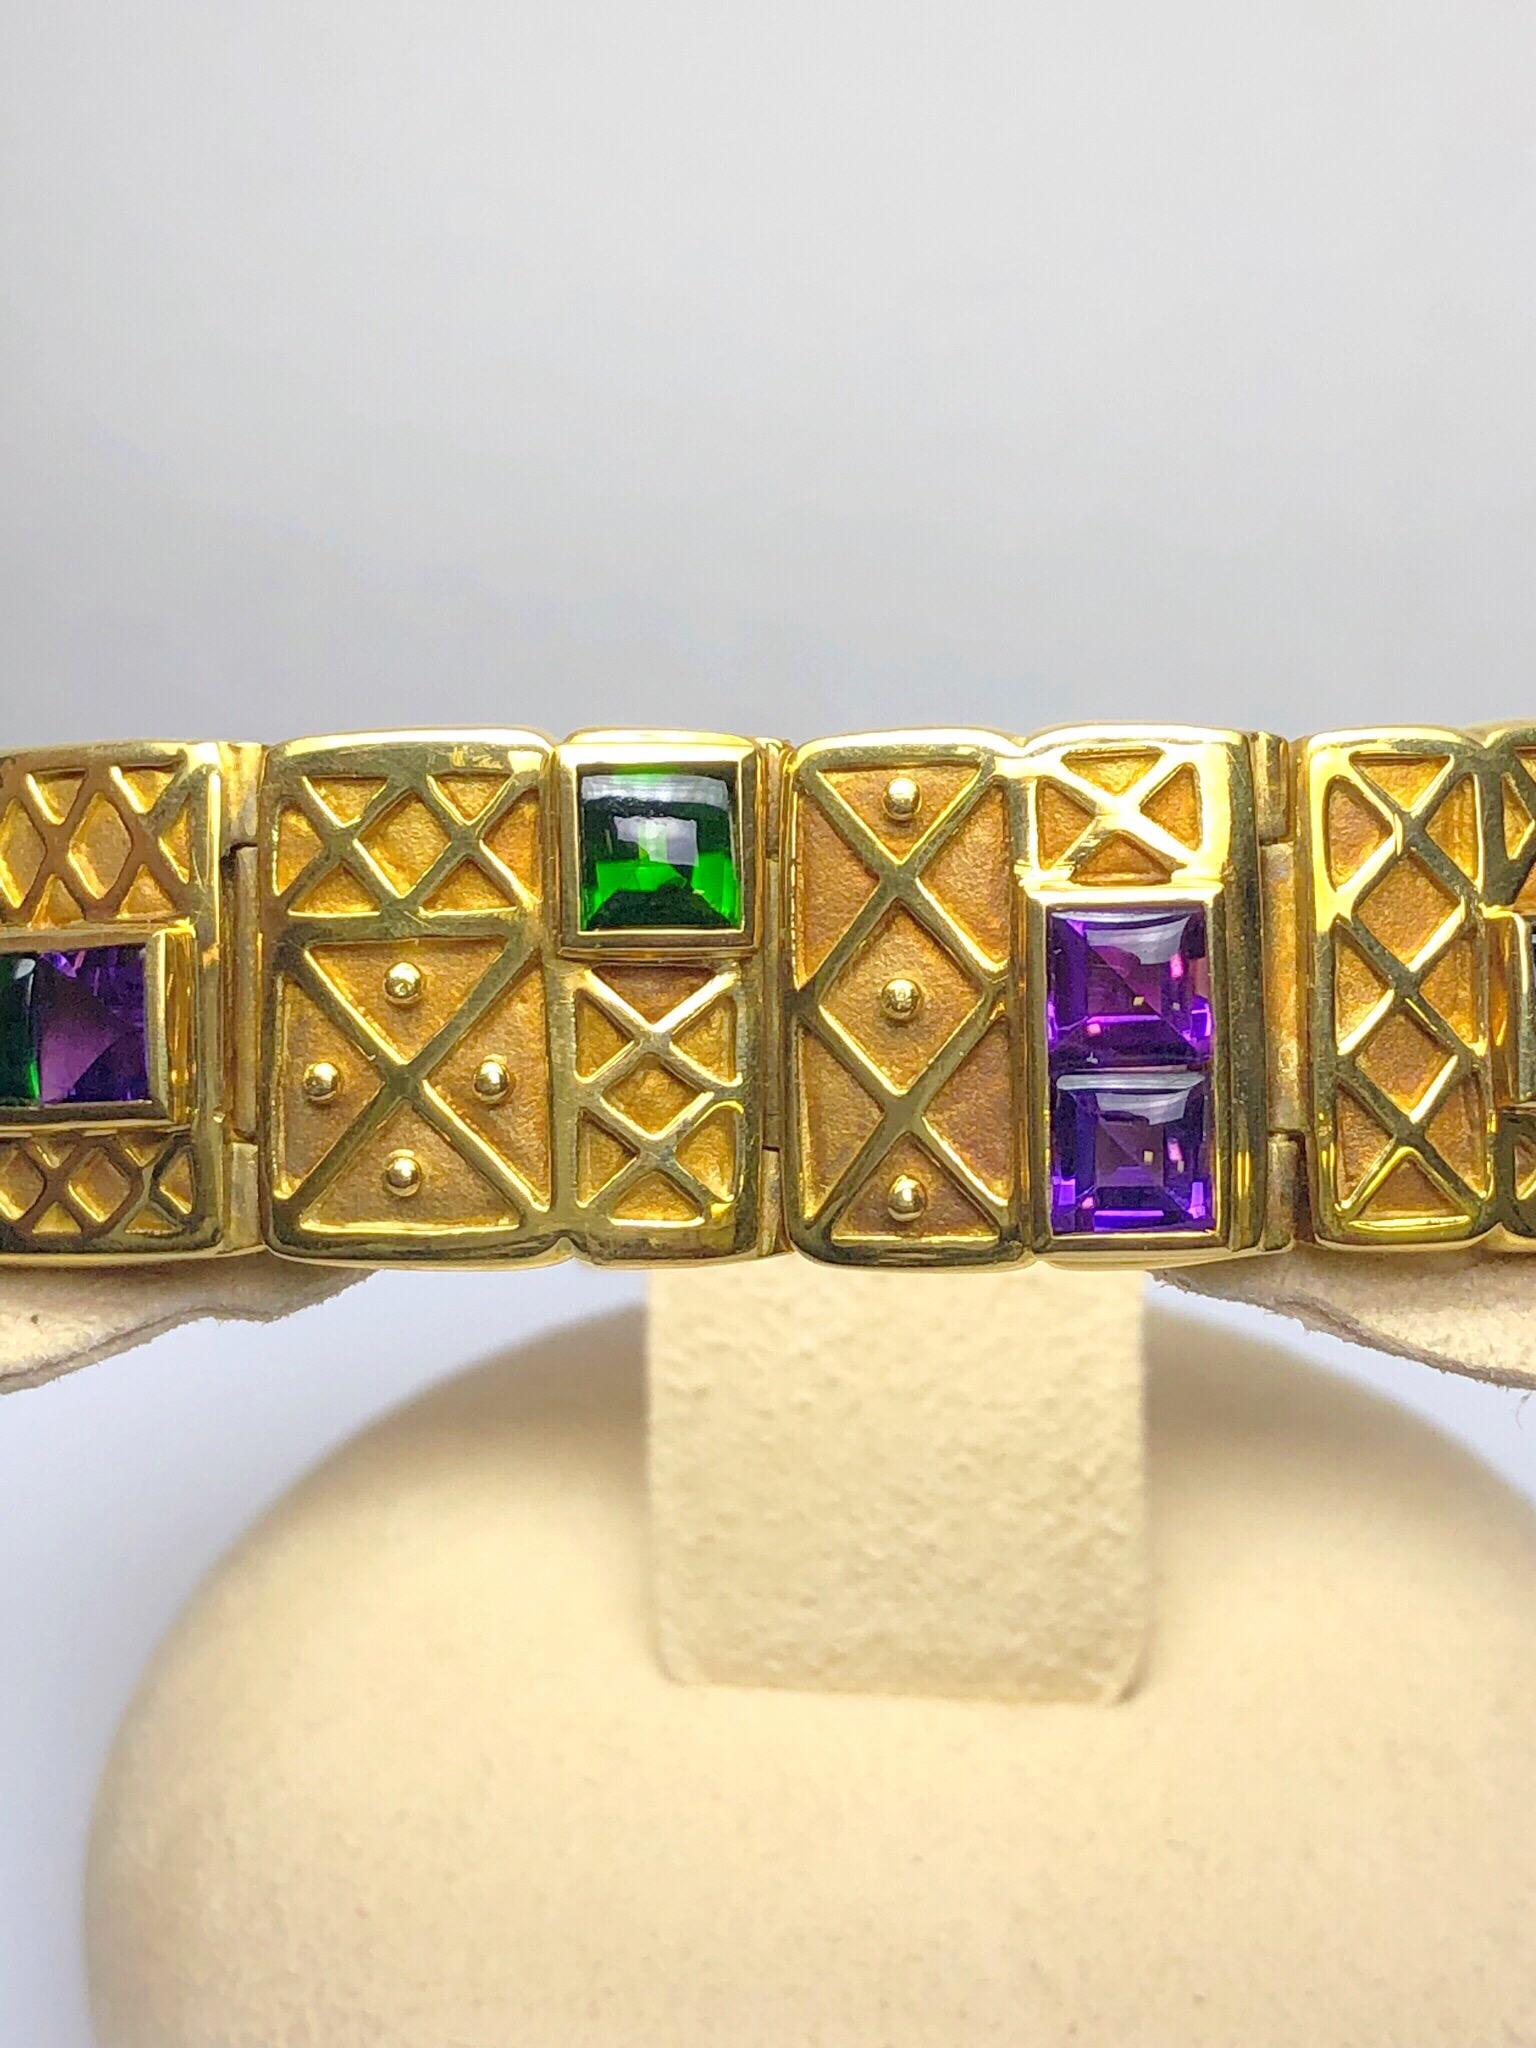 This 18KT yellow gold link bracelet was made for Cellini by Charles Turi. The 12 square links are designed with geometric patterns each set with combinations of French cut Amethyst and Chrome Green Tourmaline. The bracelet measures 7.5